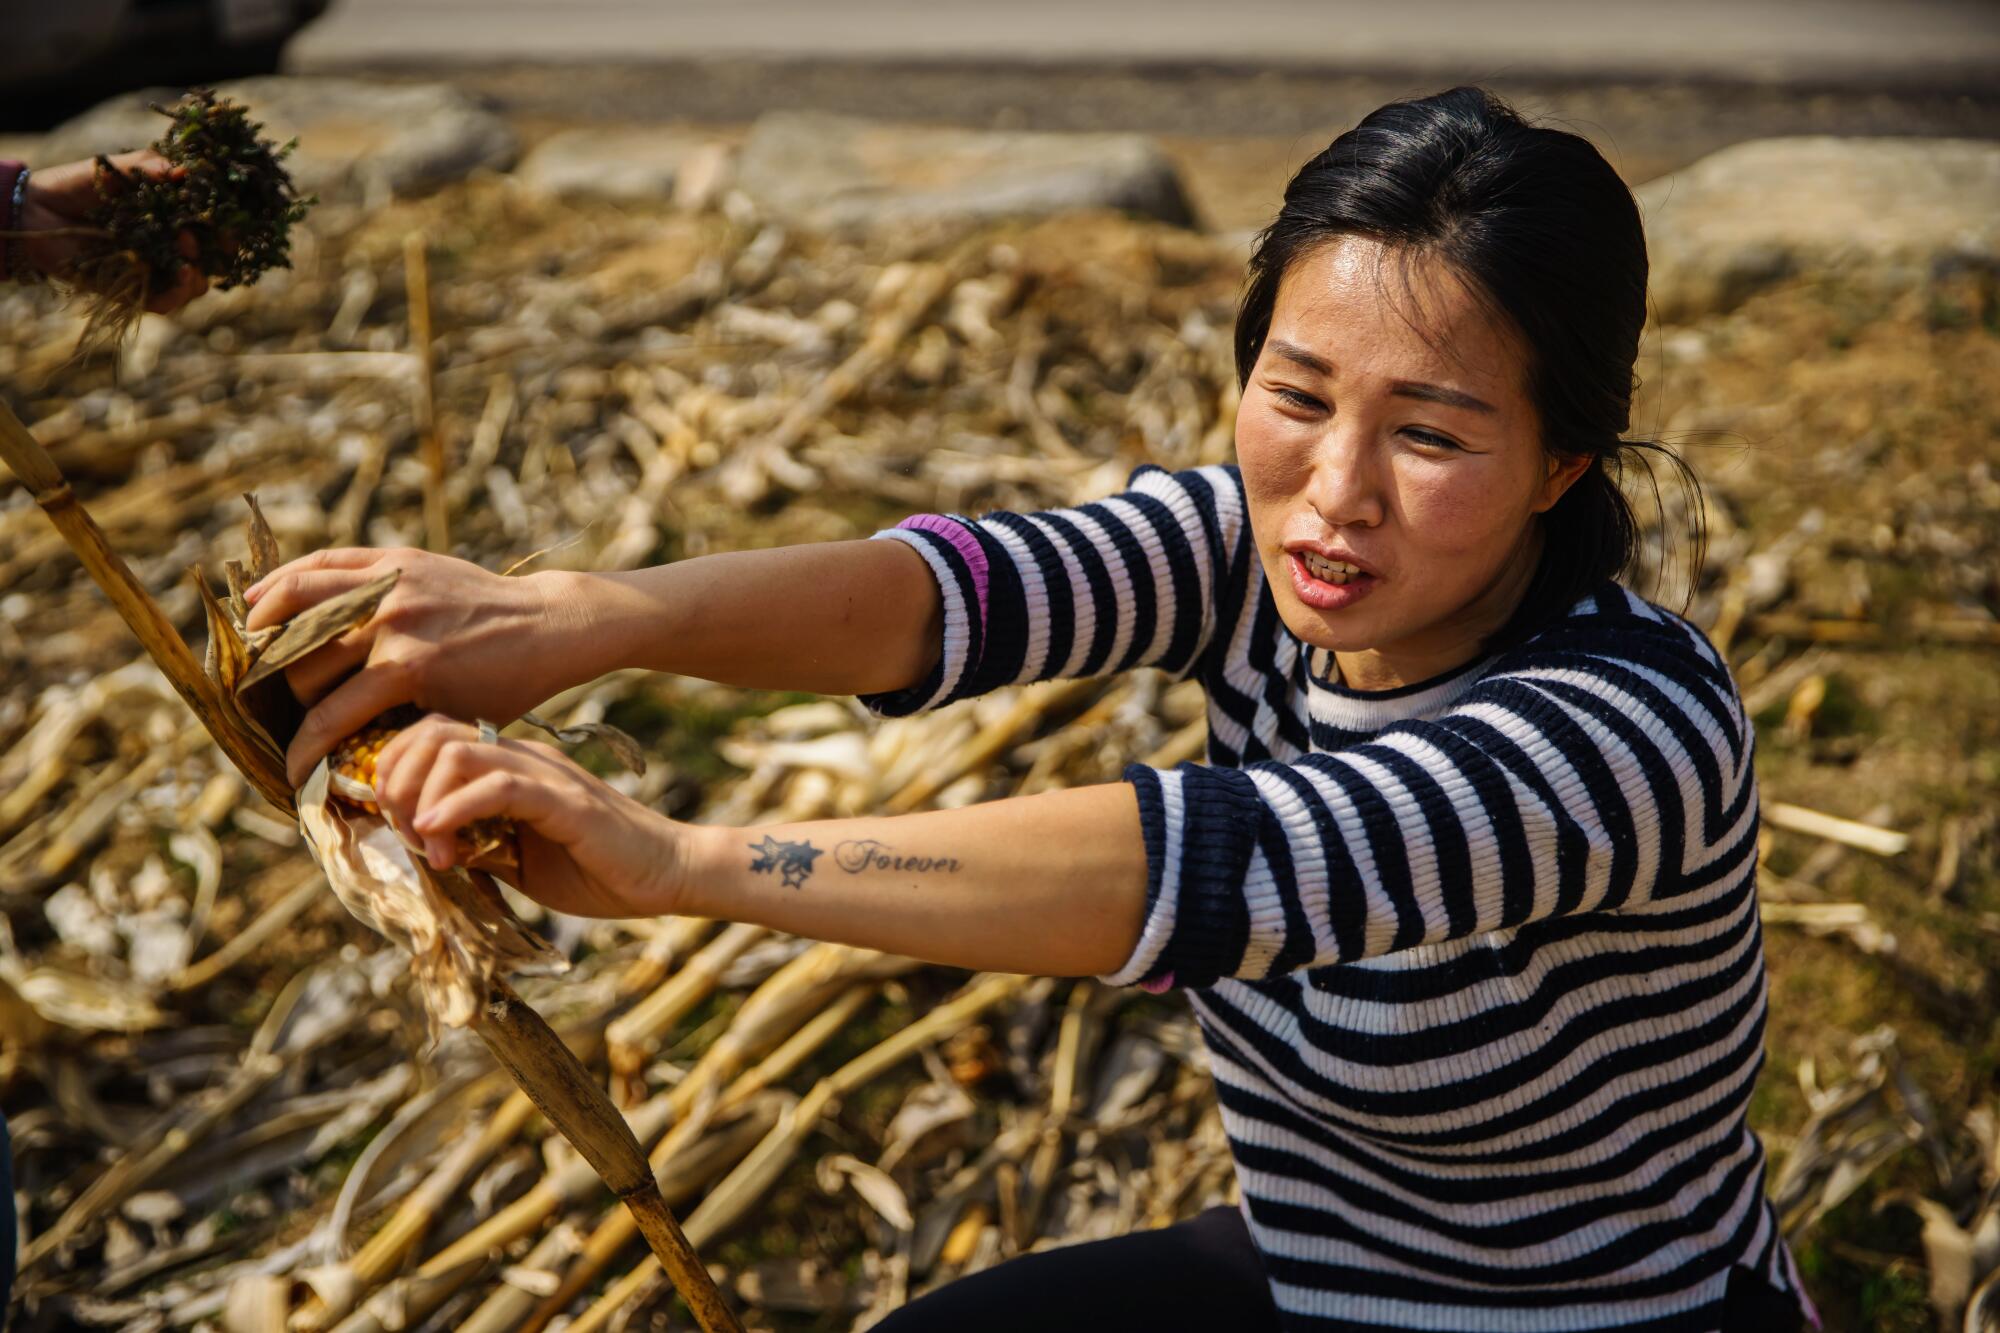 Seok Hyeon Ju holds up a leftover cob of corn